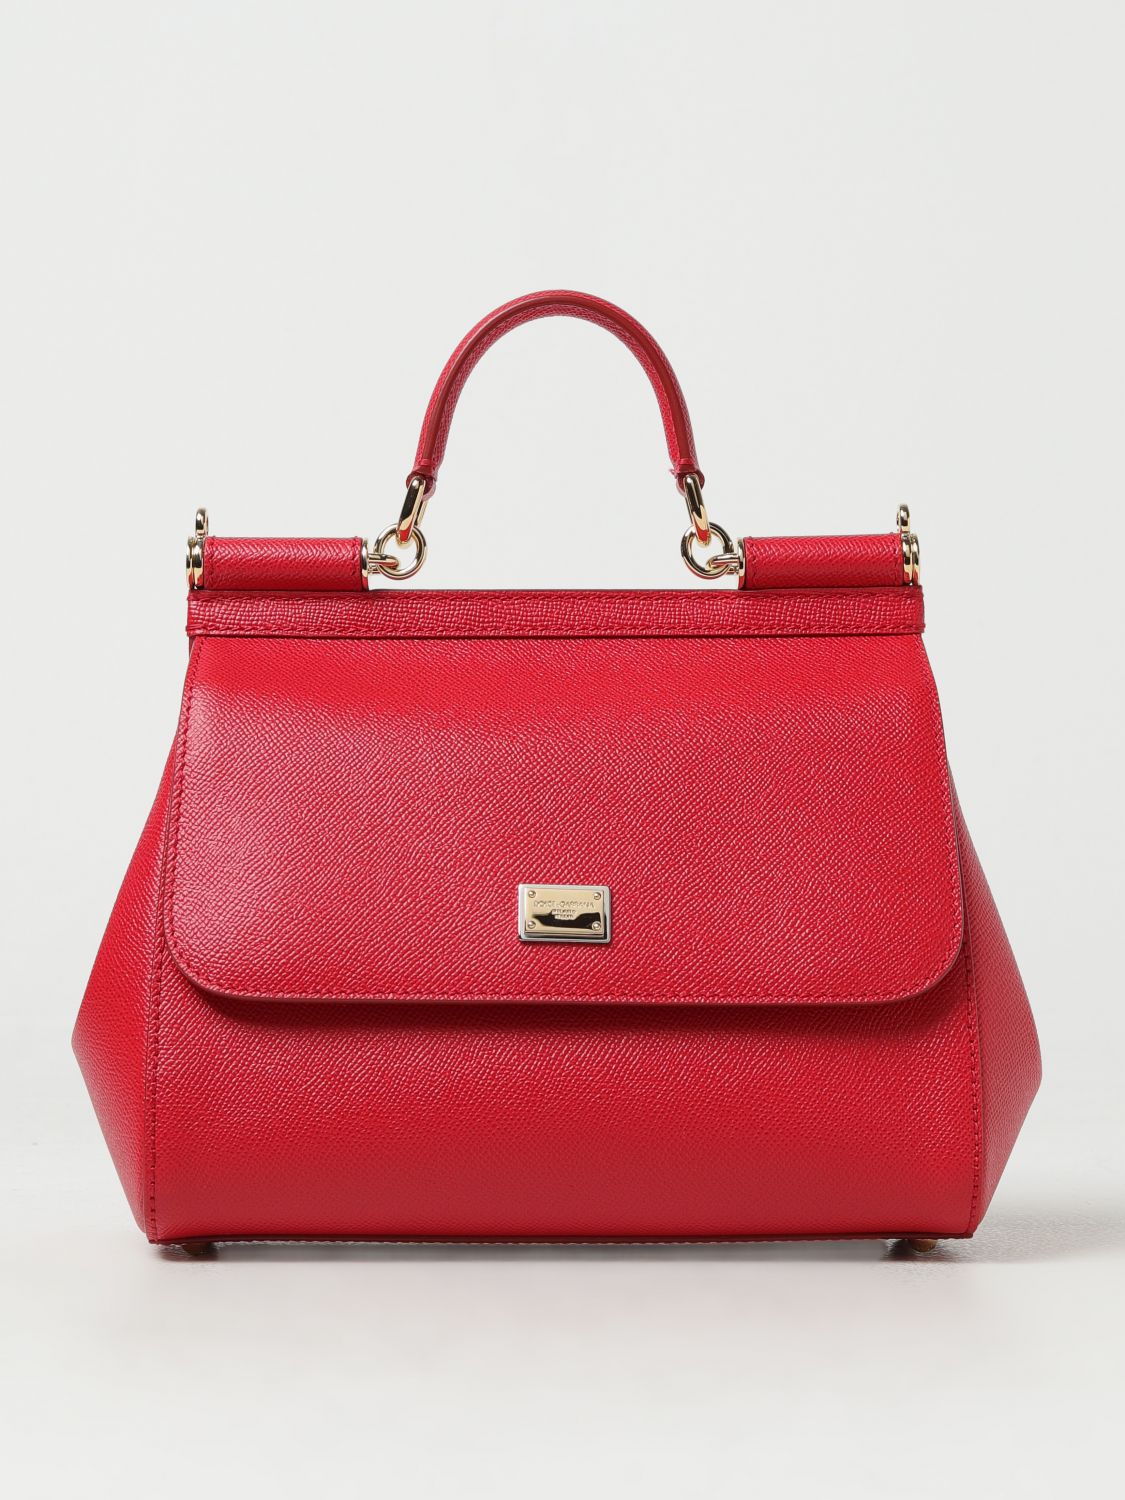 Dolce & Gabbana Sicily Bag In Micro Grained Leather In Red